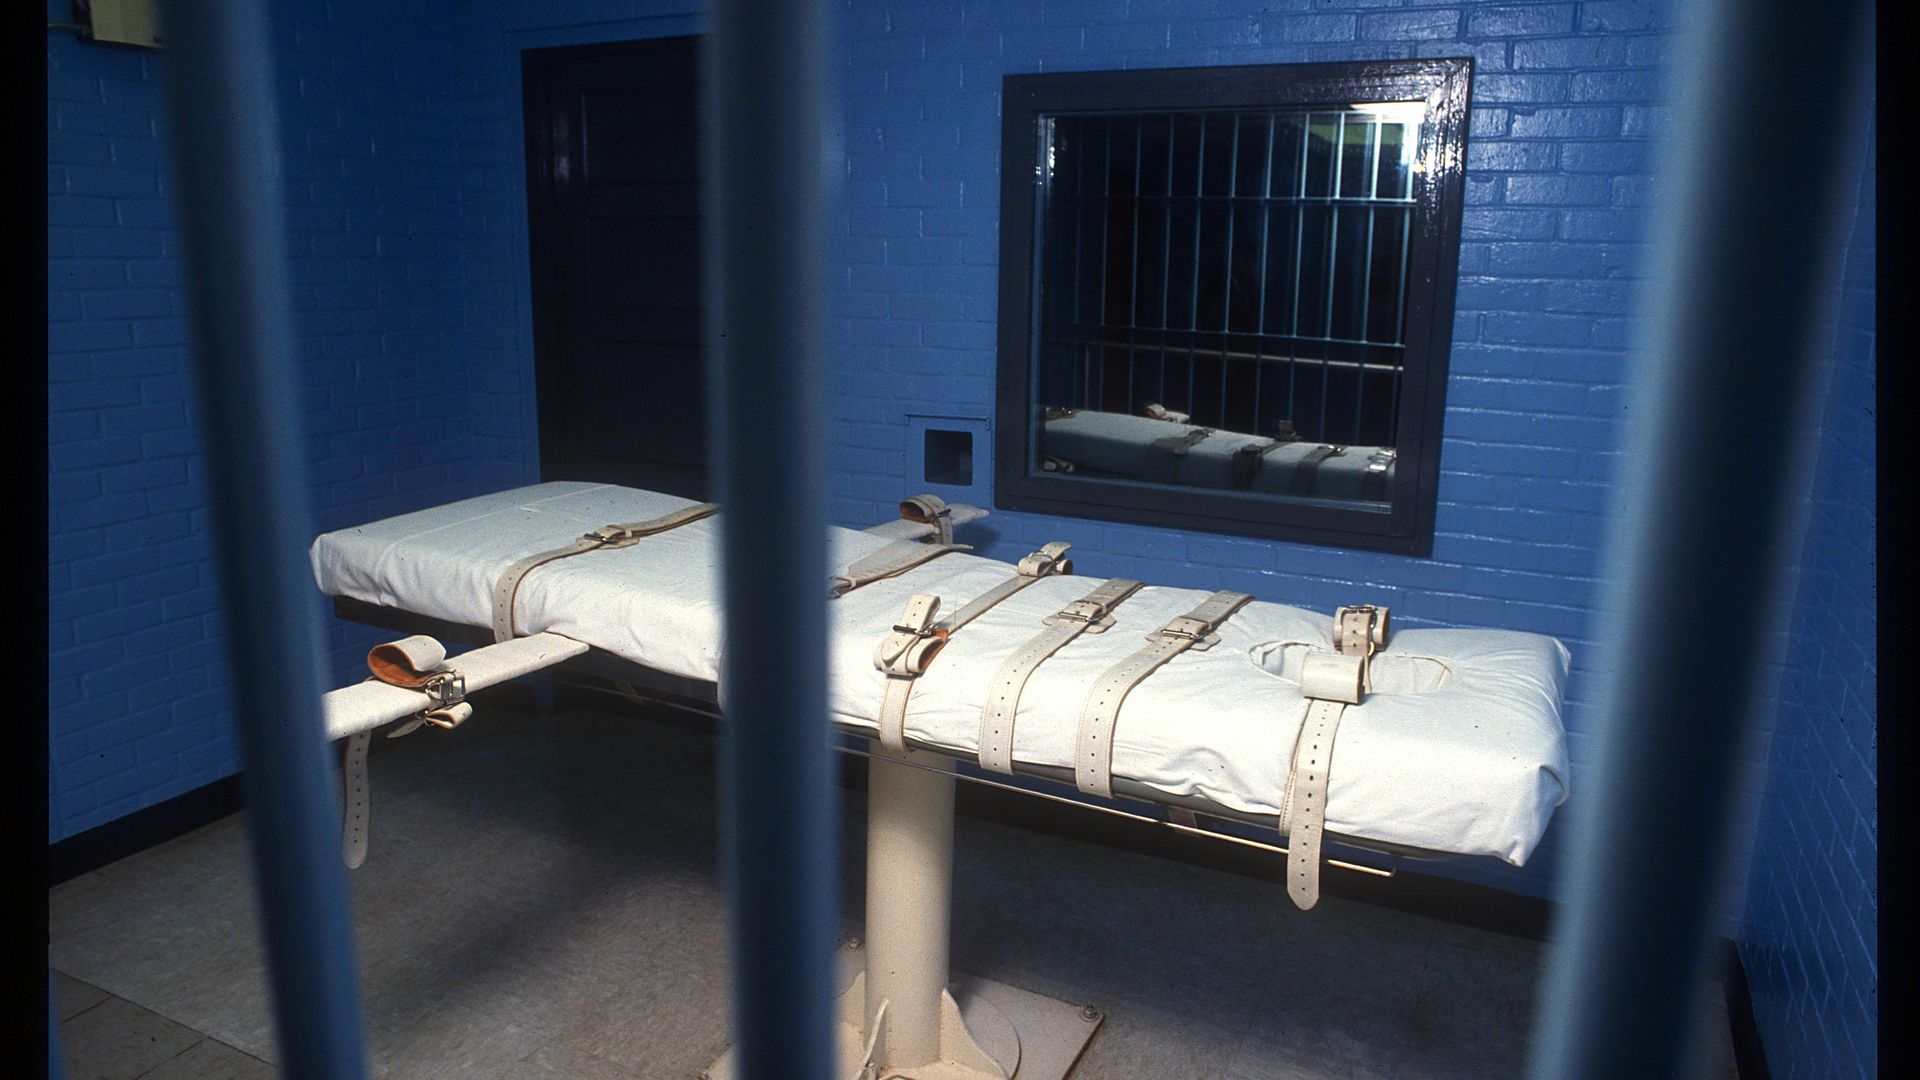 Lethal injection Death Chamber at a Texas prison on November 14, 1991 at Huntsville, The Ellis Unit, Texas .